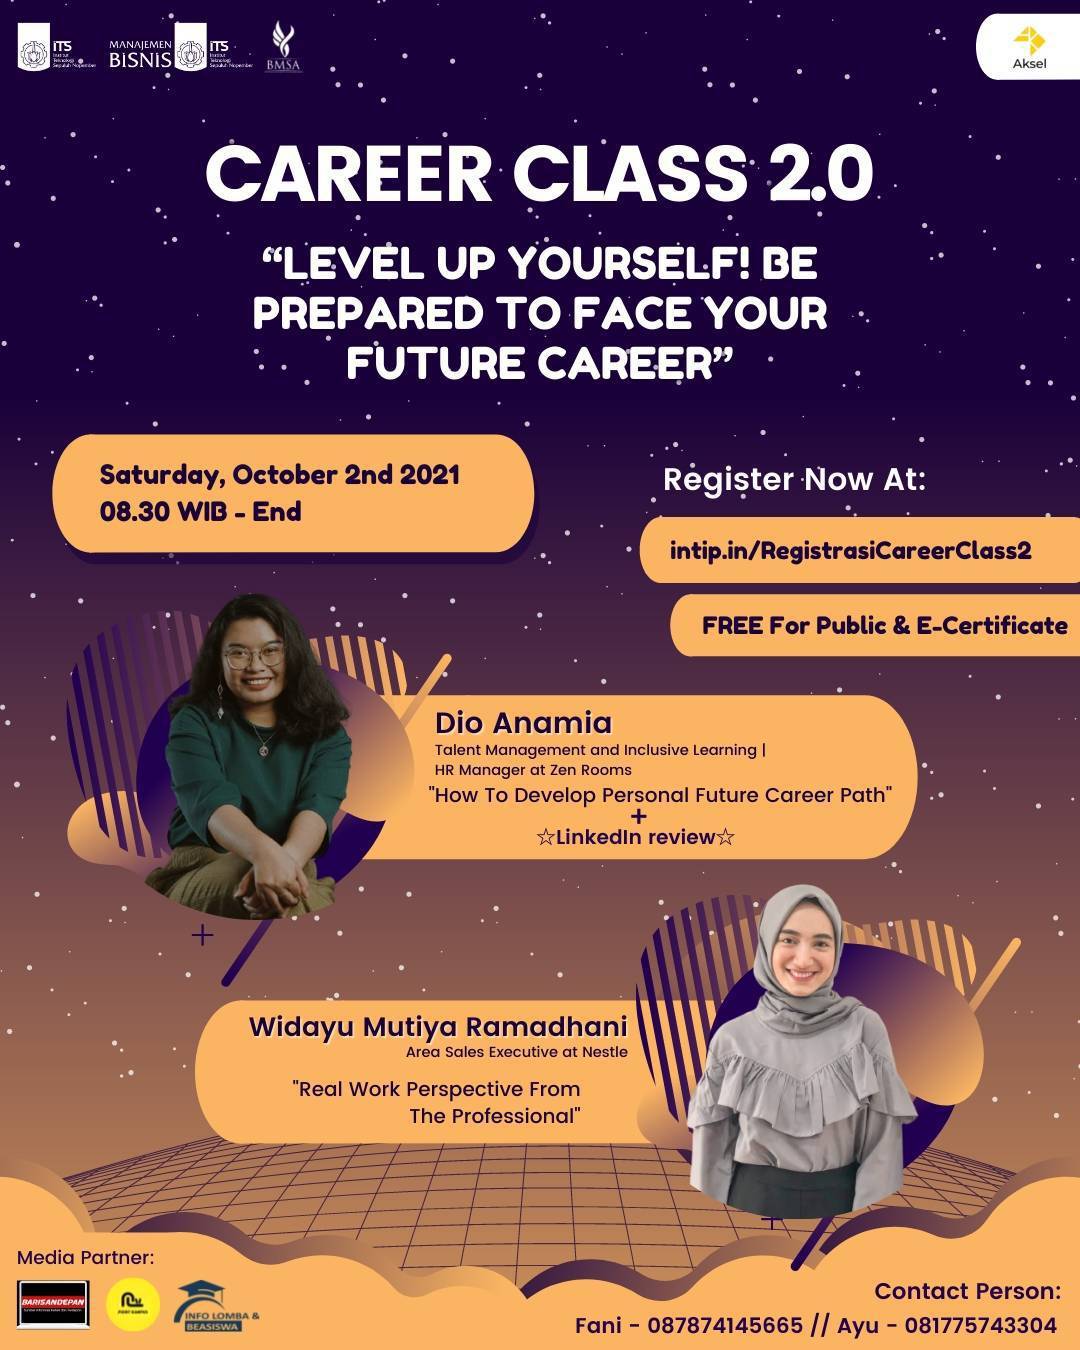 CAREER CLASS 2.0: LEVEL UP YOURSELF! BE PREPARED TO FACE YOUR FUTURE CAREER